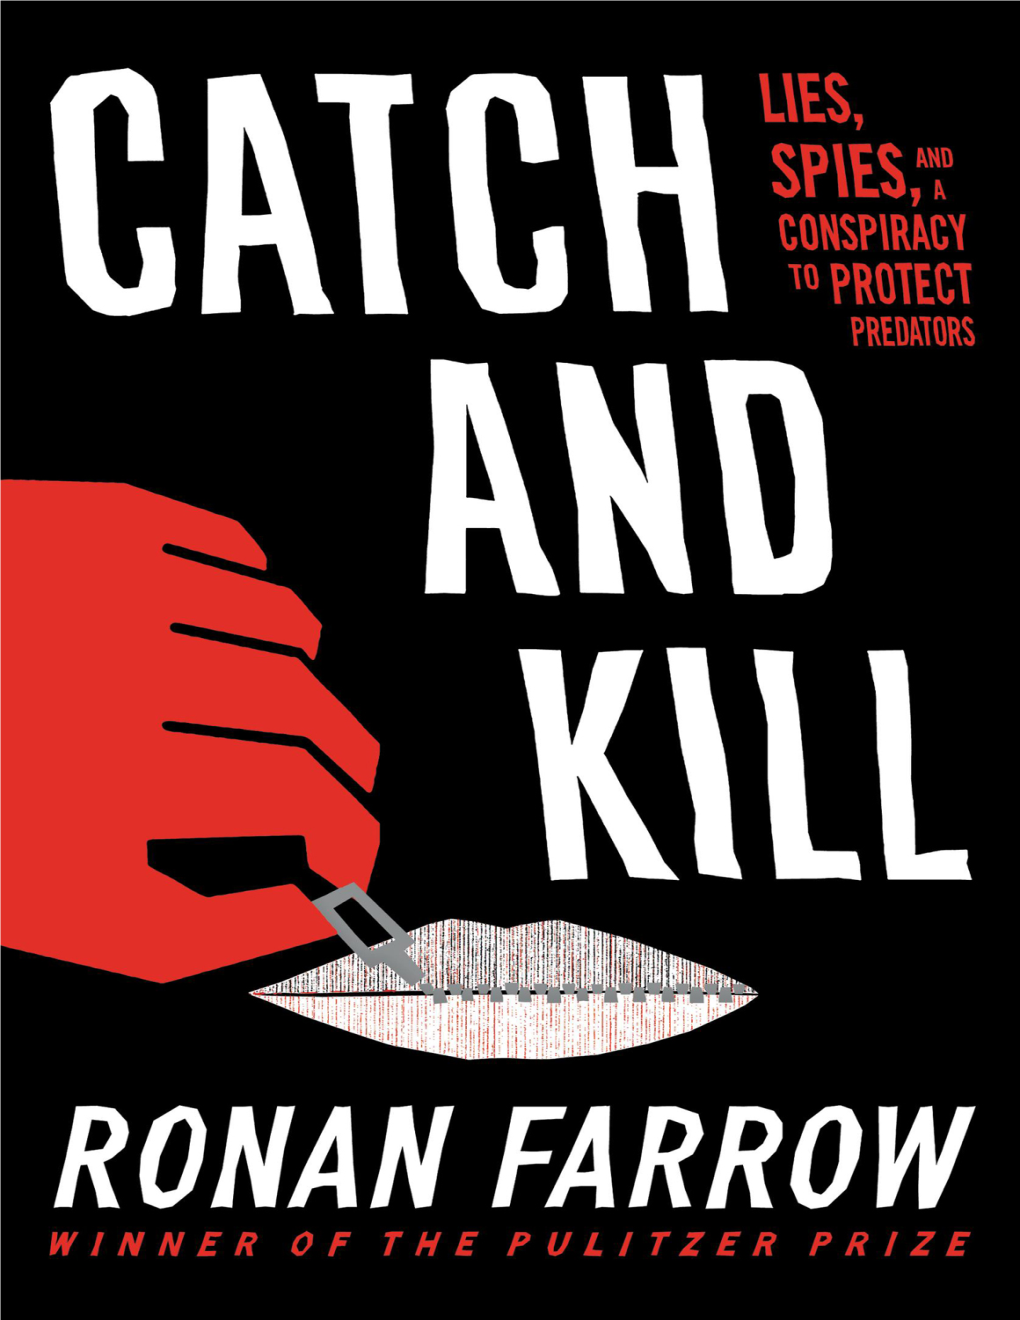 Catch and Kill: Lies, Spies, and a Conspiracy to Protect